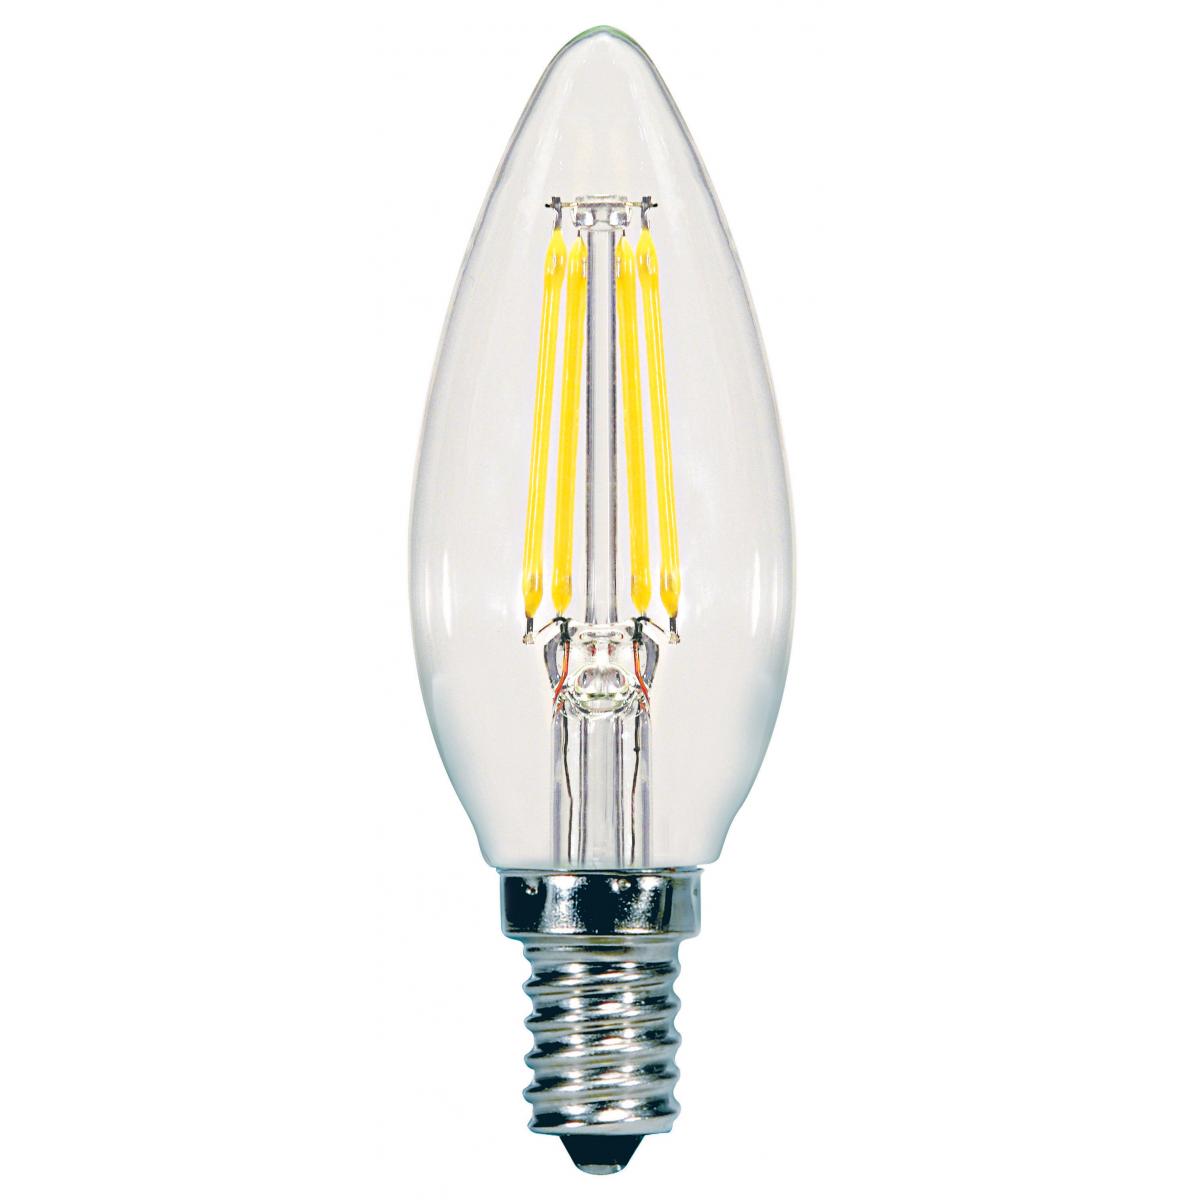 Replacement for Satco S9961 5.5W CTC/LED/30K/CL/120V 5.5 Watt B11 LED Clear E12 Candelabra base 3000K 120 Volt - NOW S21274